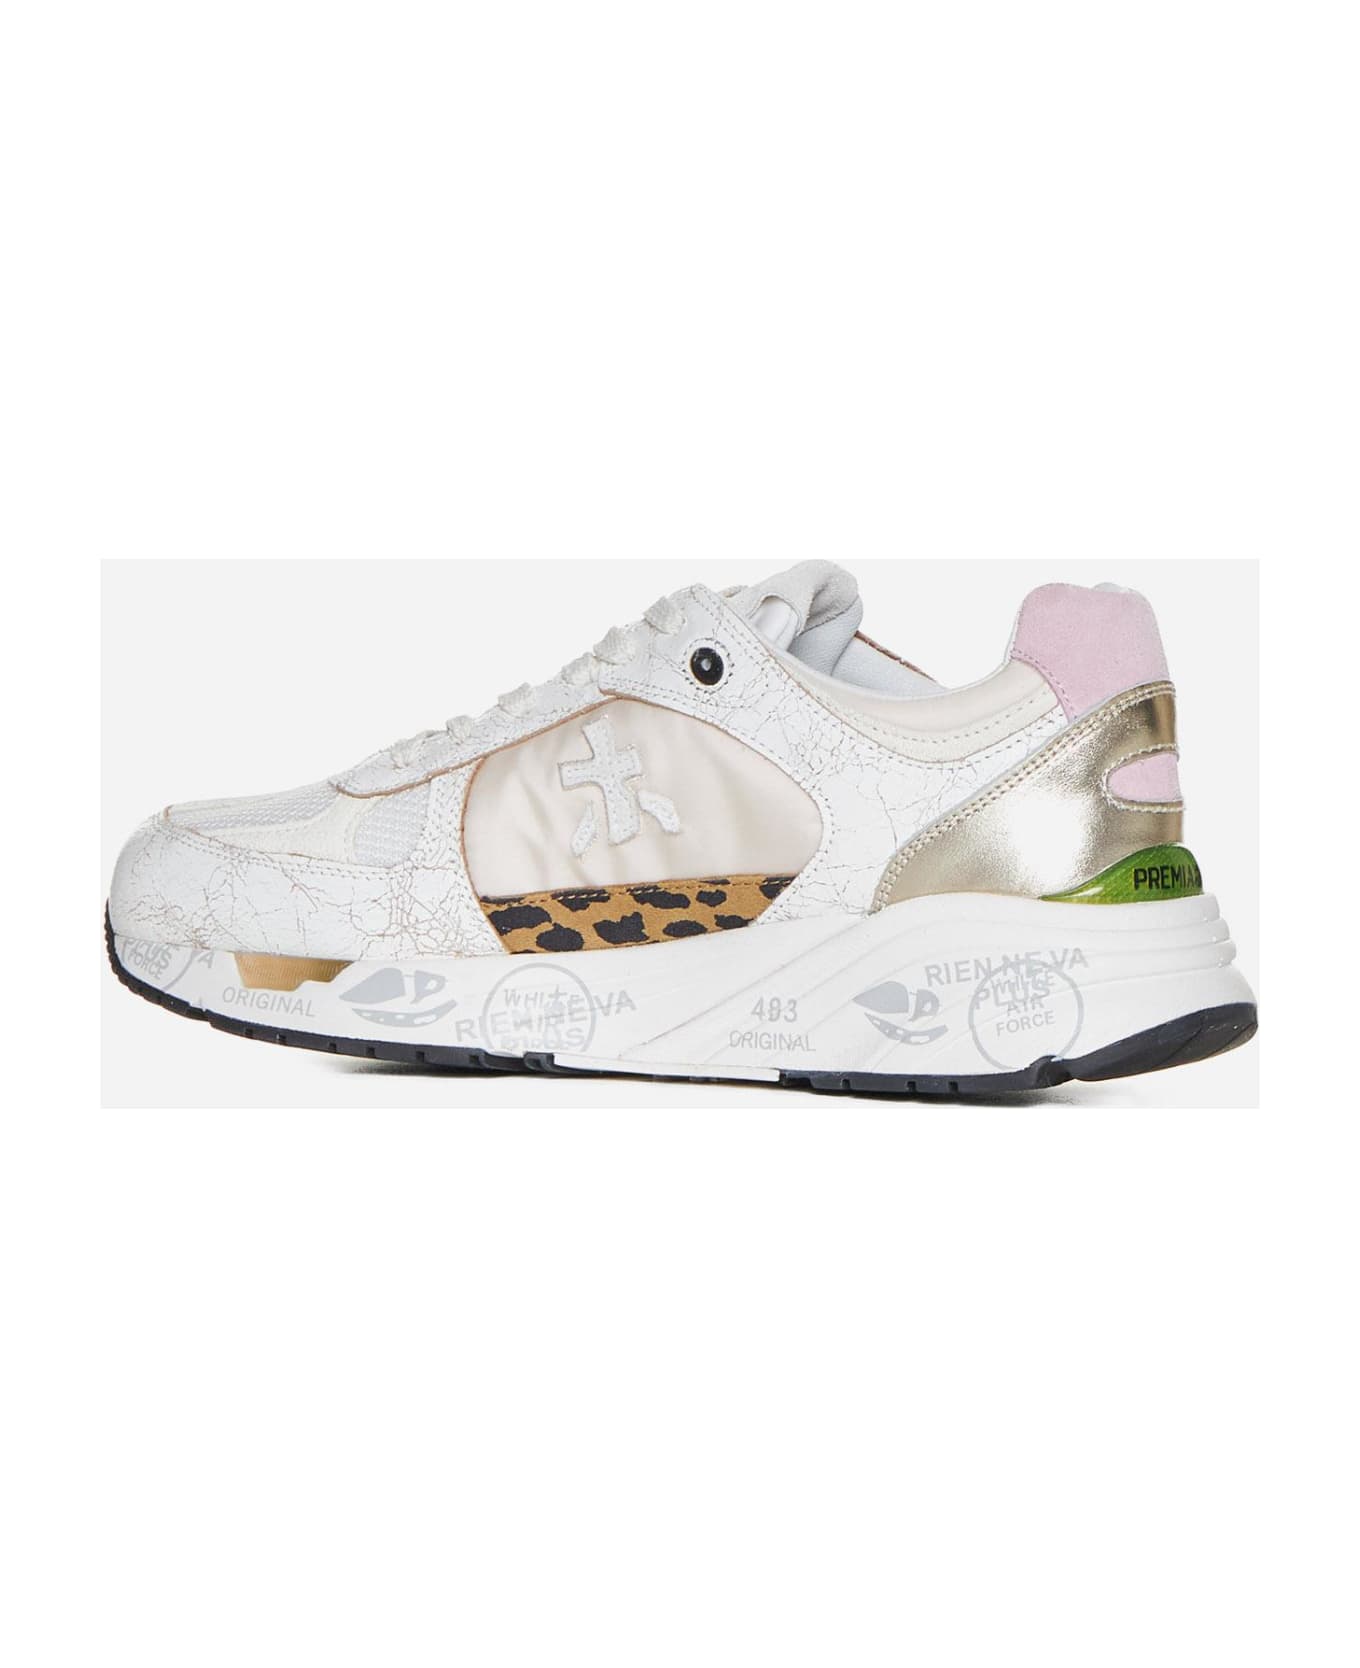 Premiata Mased Leather, Suede And Nylon Sneakers - Offwhite